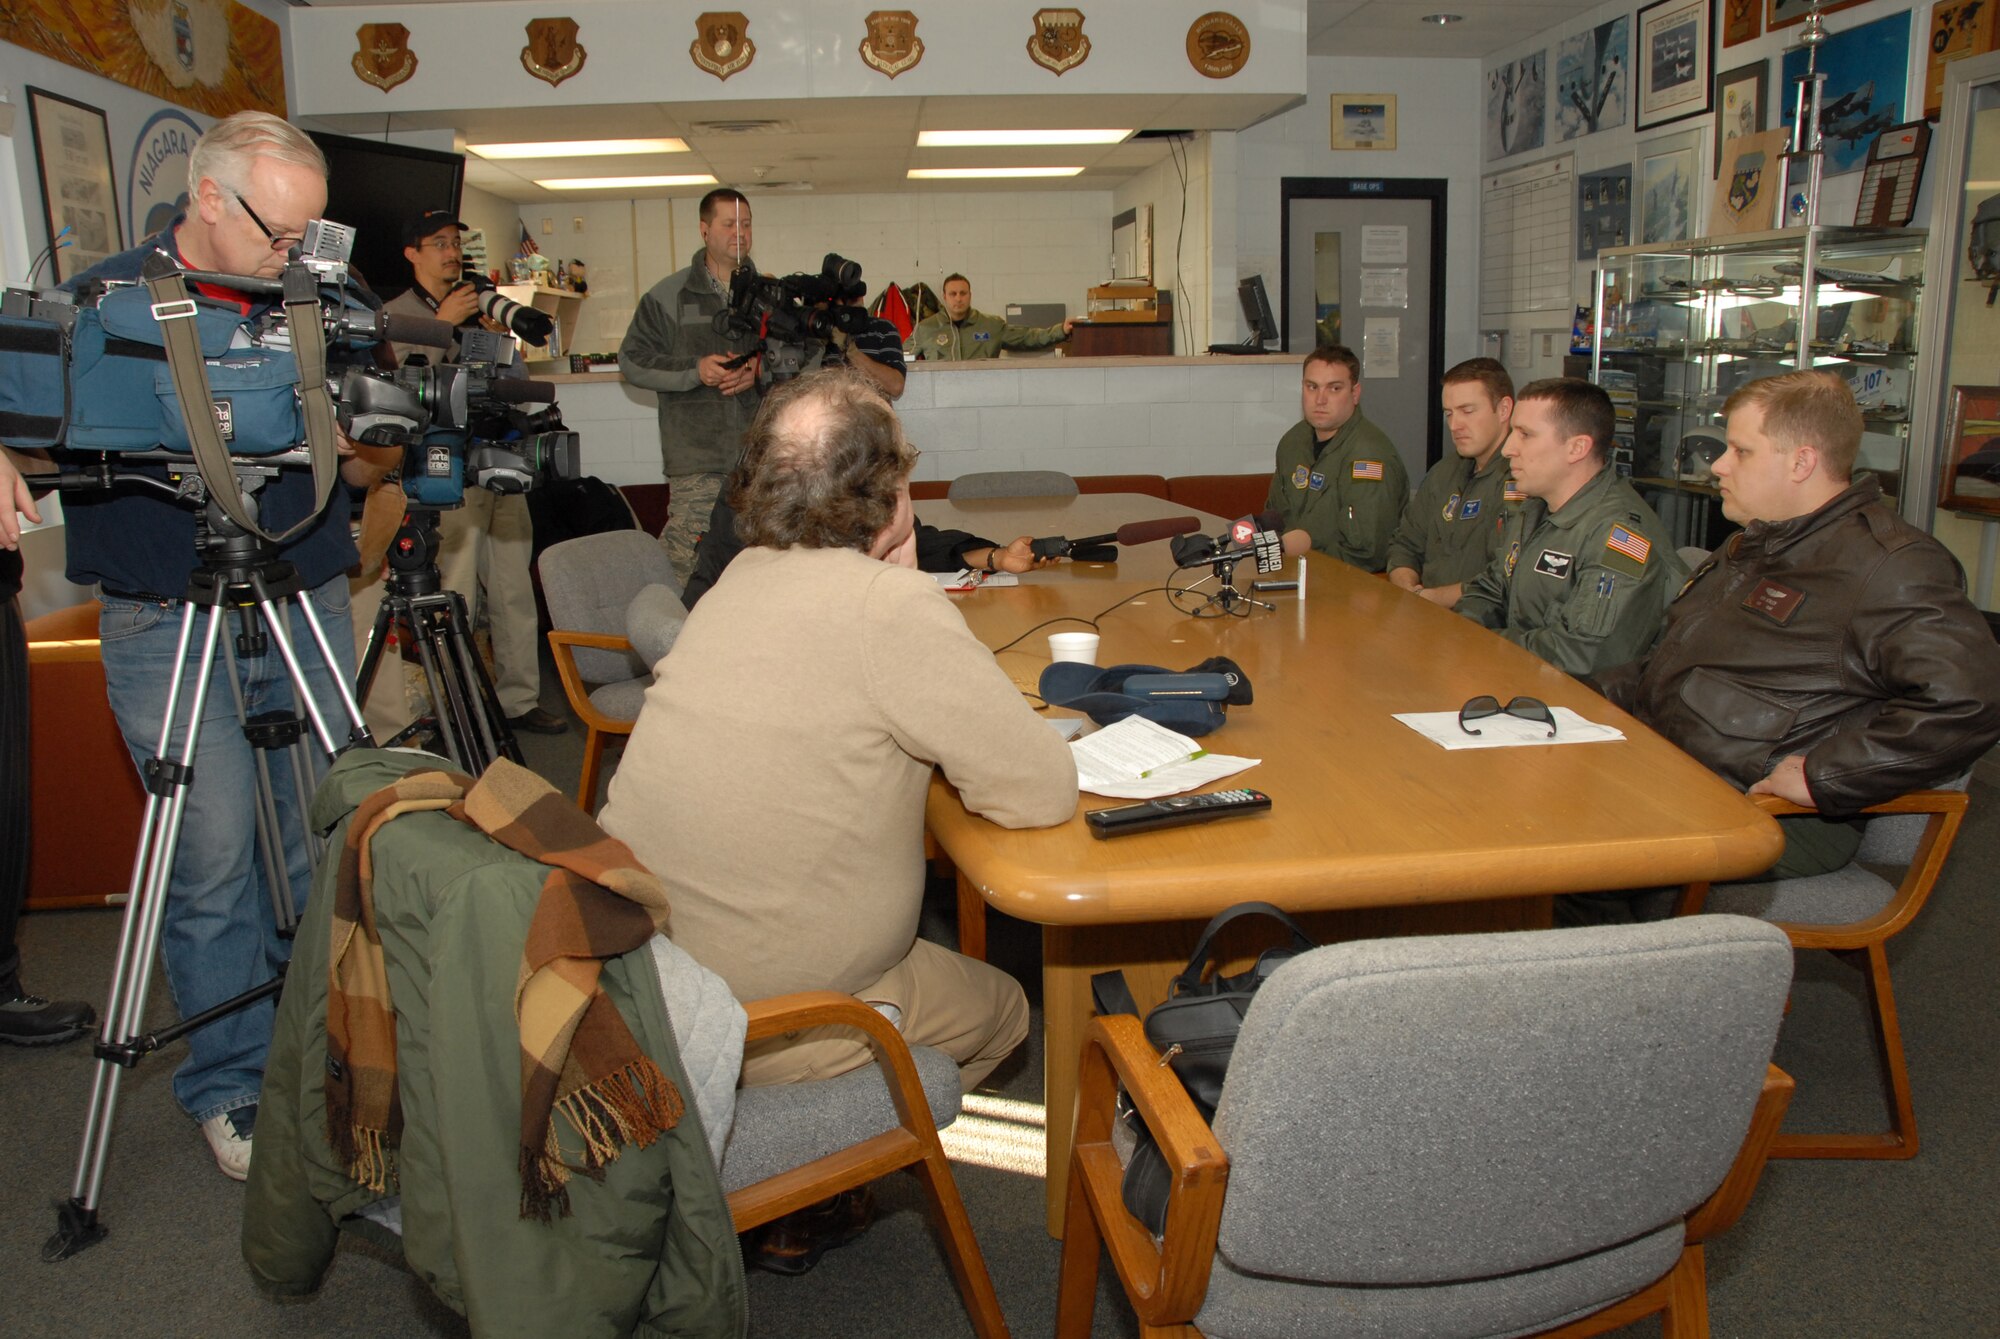 Members from the 107th New York Air National Guard and members from the 914th Air Force Reserves talk to the local media upon arriving home. The members had just completed a tour, delivering aid to Haiti. (From left to right) Staff Sgt. Brian Waite, 107th C-130 flight engineer, Capt. Justin Pautler, 107th C-130 pilot, Capt. Richard Konopczynsky, 914th C-130 pilot and Tech Sgt. Rick Ackley, 914thC-130 flight engineer. (U.S. Air Force Photo/ Tech Sgt. Cathy Perretta)